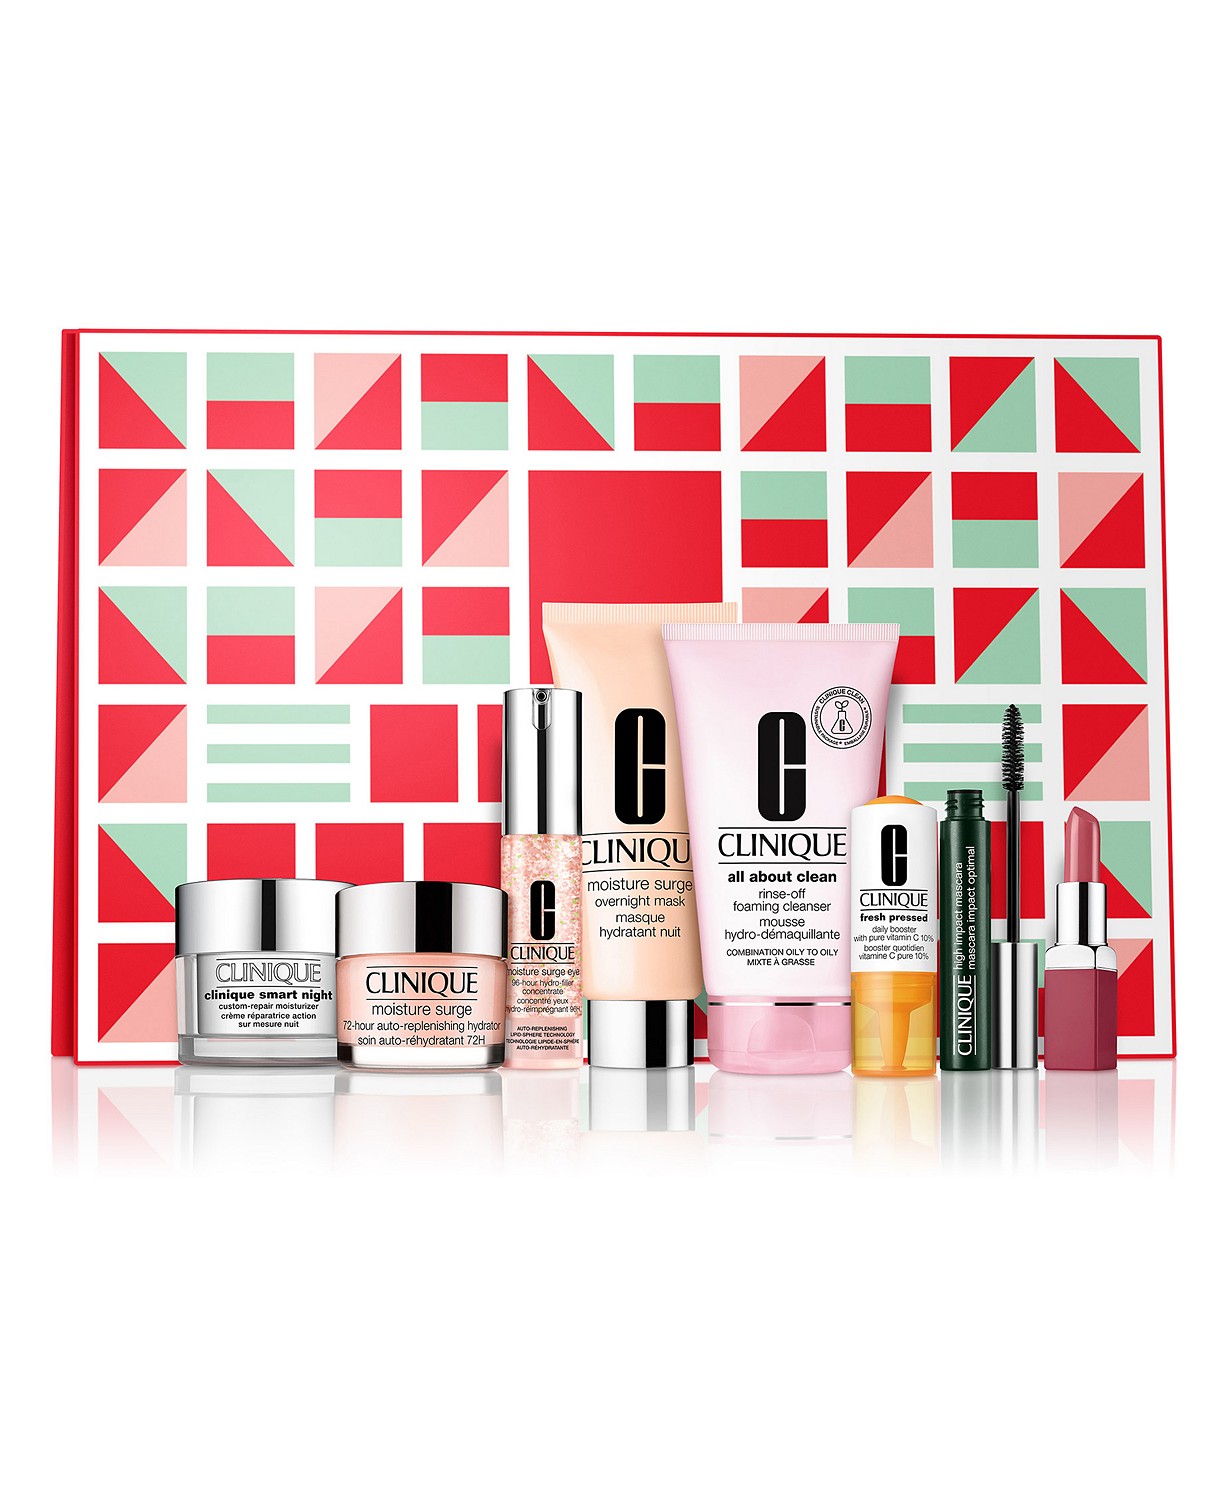 20% Off! Clinique Festive Favourites - NOW Only $39.60 with any Clinique purchase (A $253.00 value!)  Free shipping.